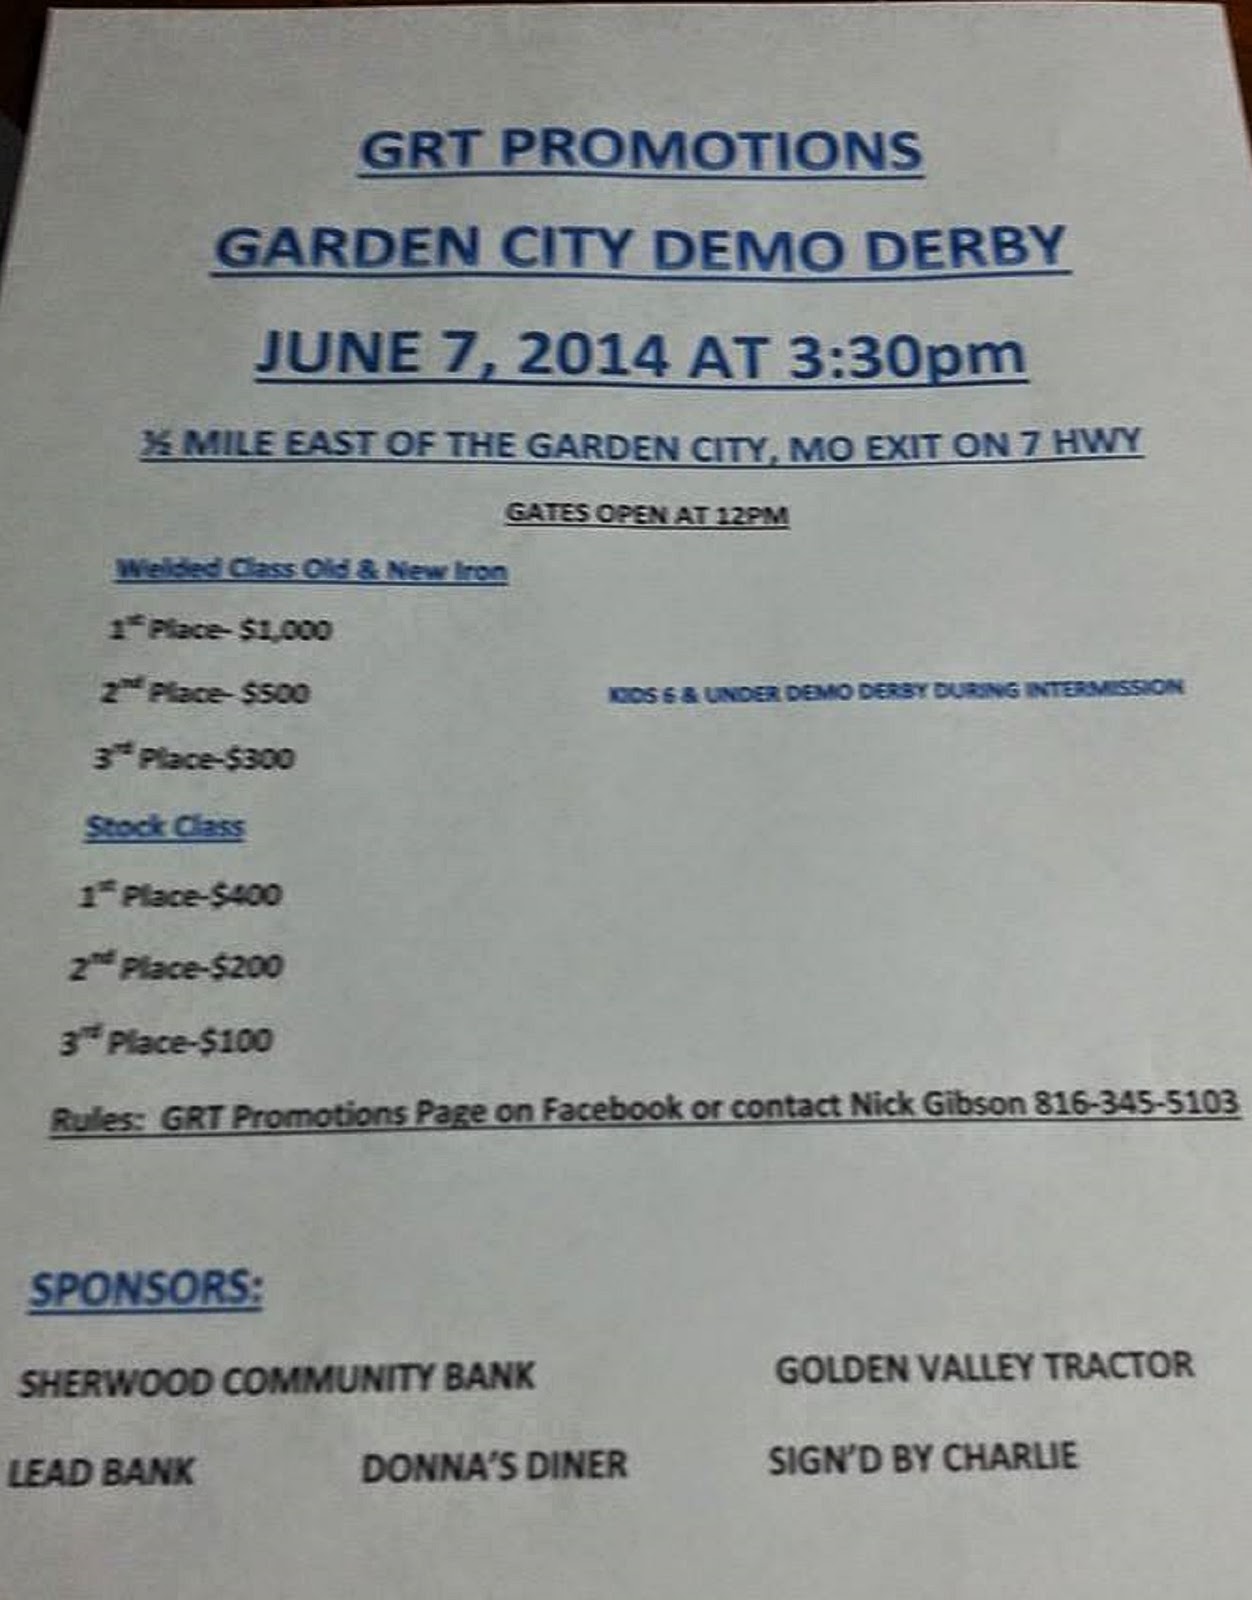 Mid America Live Grt Promotions Garden City Demo Derby June 7th